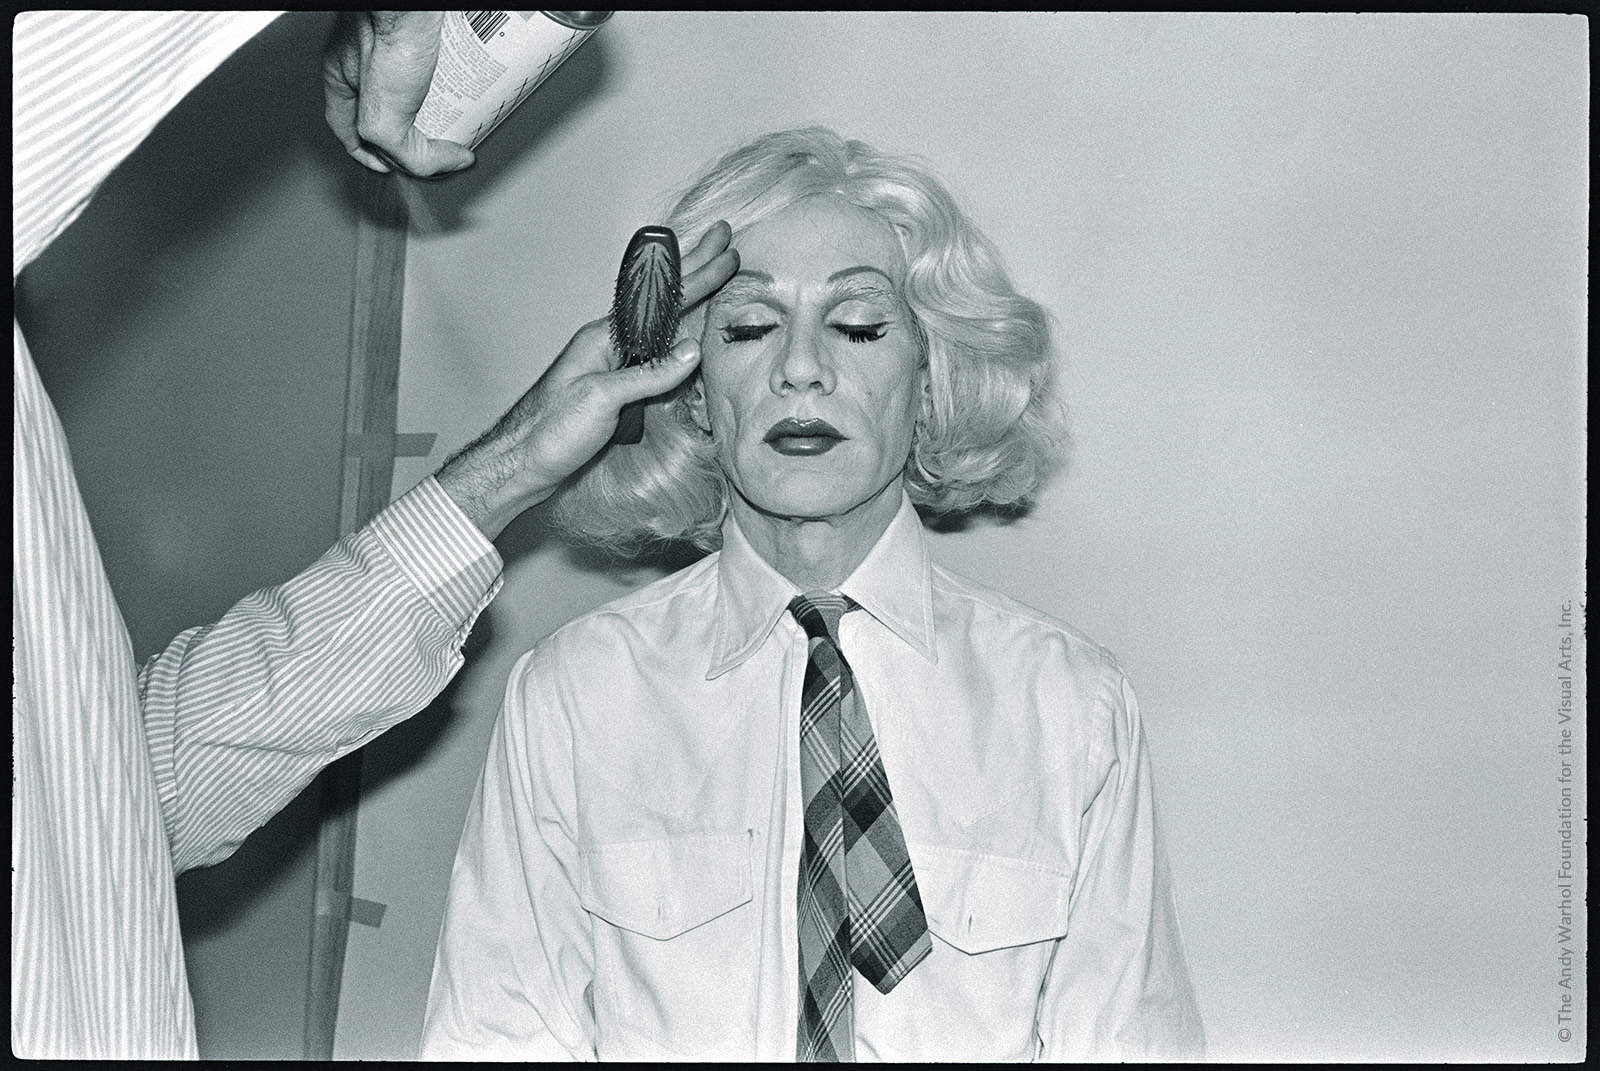 Andy Warhol (U.S.A., 1928–1987), Negative [Andy Warhol Self-Portrait in Drag photo shoot], 1981, Black-and-white negatives. Cantor Arts Center collection, Gift of The Andy Warhol Foundation for the Visual Arts, 2014.41.2516_9_WP. © The Andy Warhol Foundation for the Visual Arts, Inc.